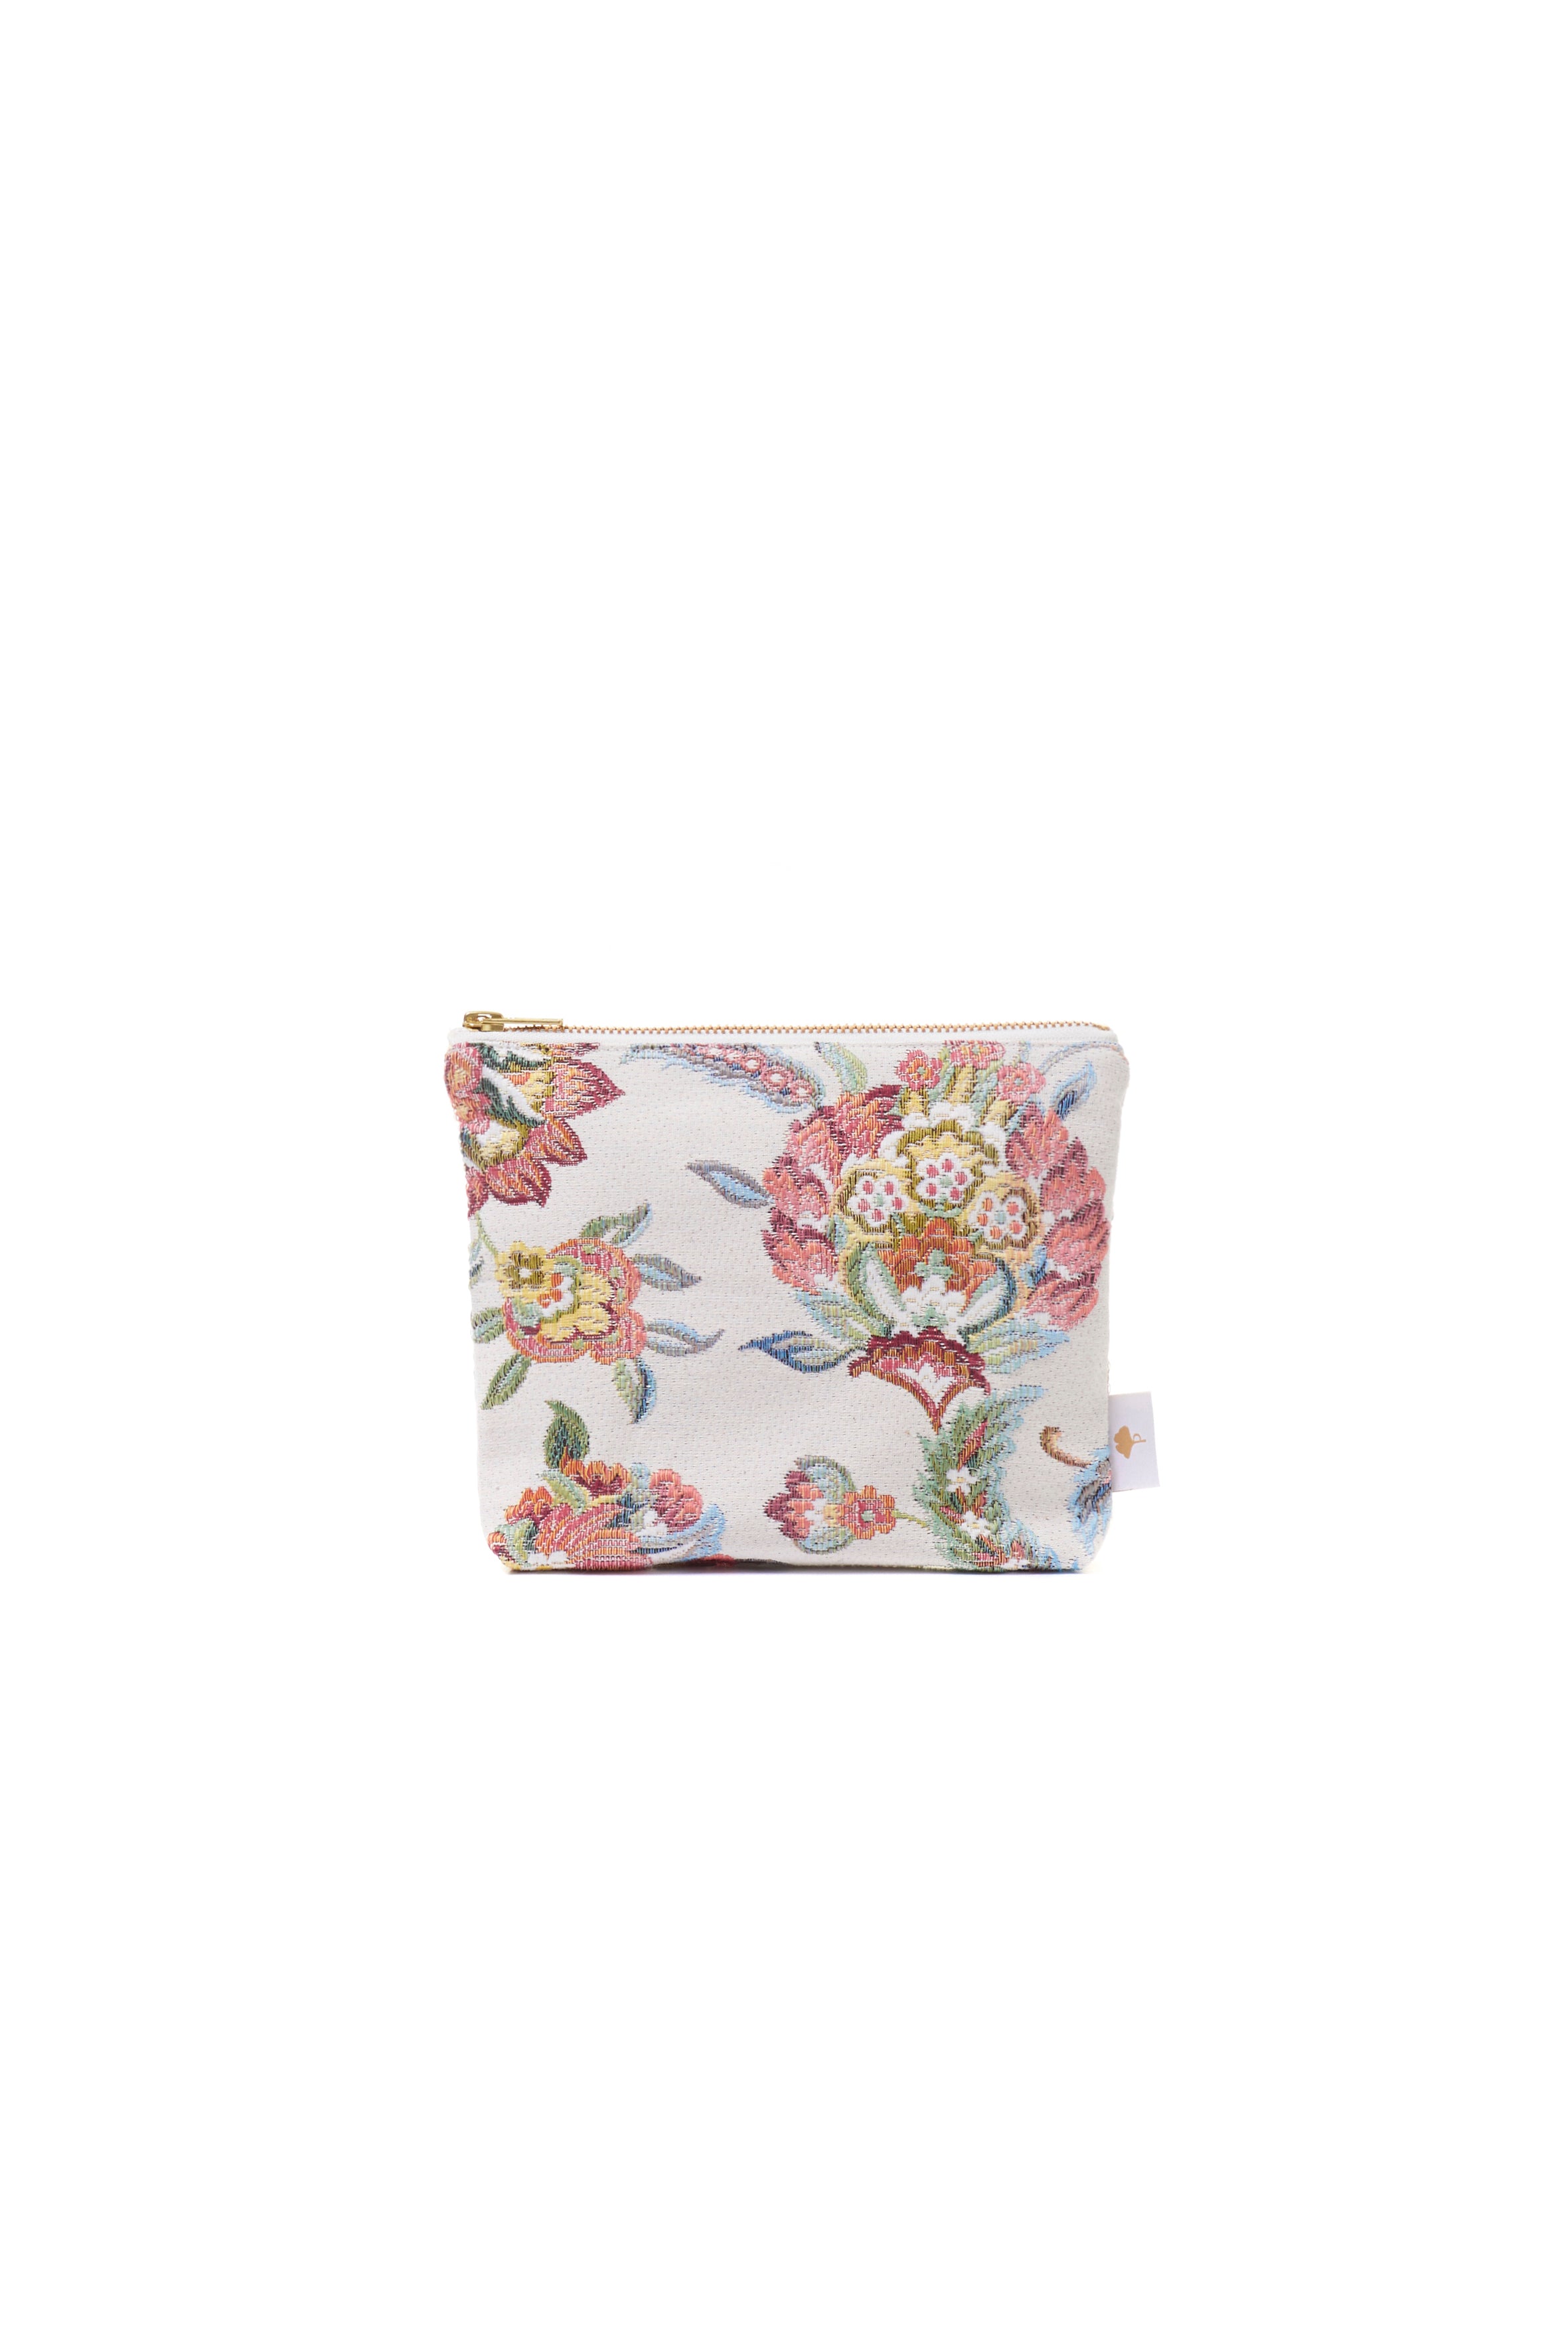 TRAVEL POUCH SMALL - ROSE